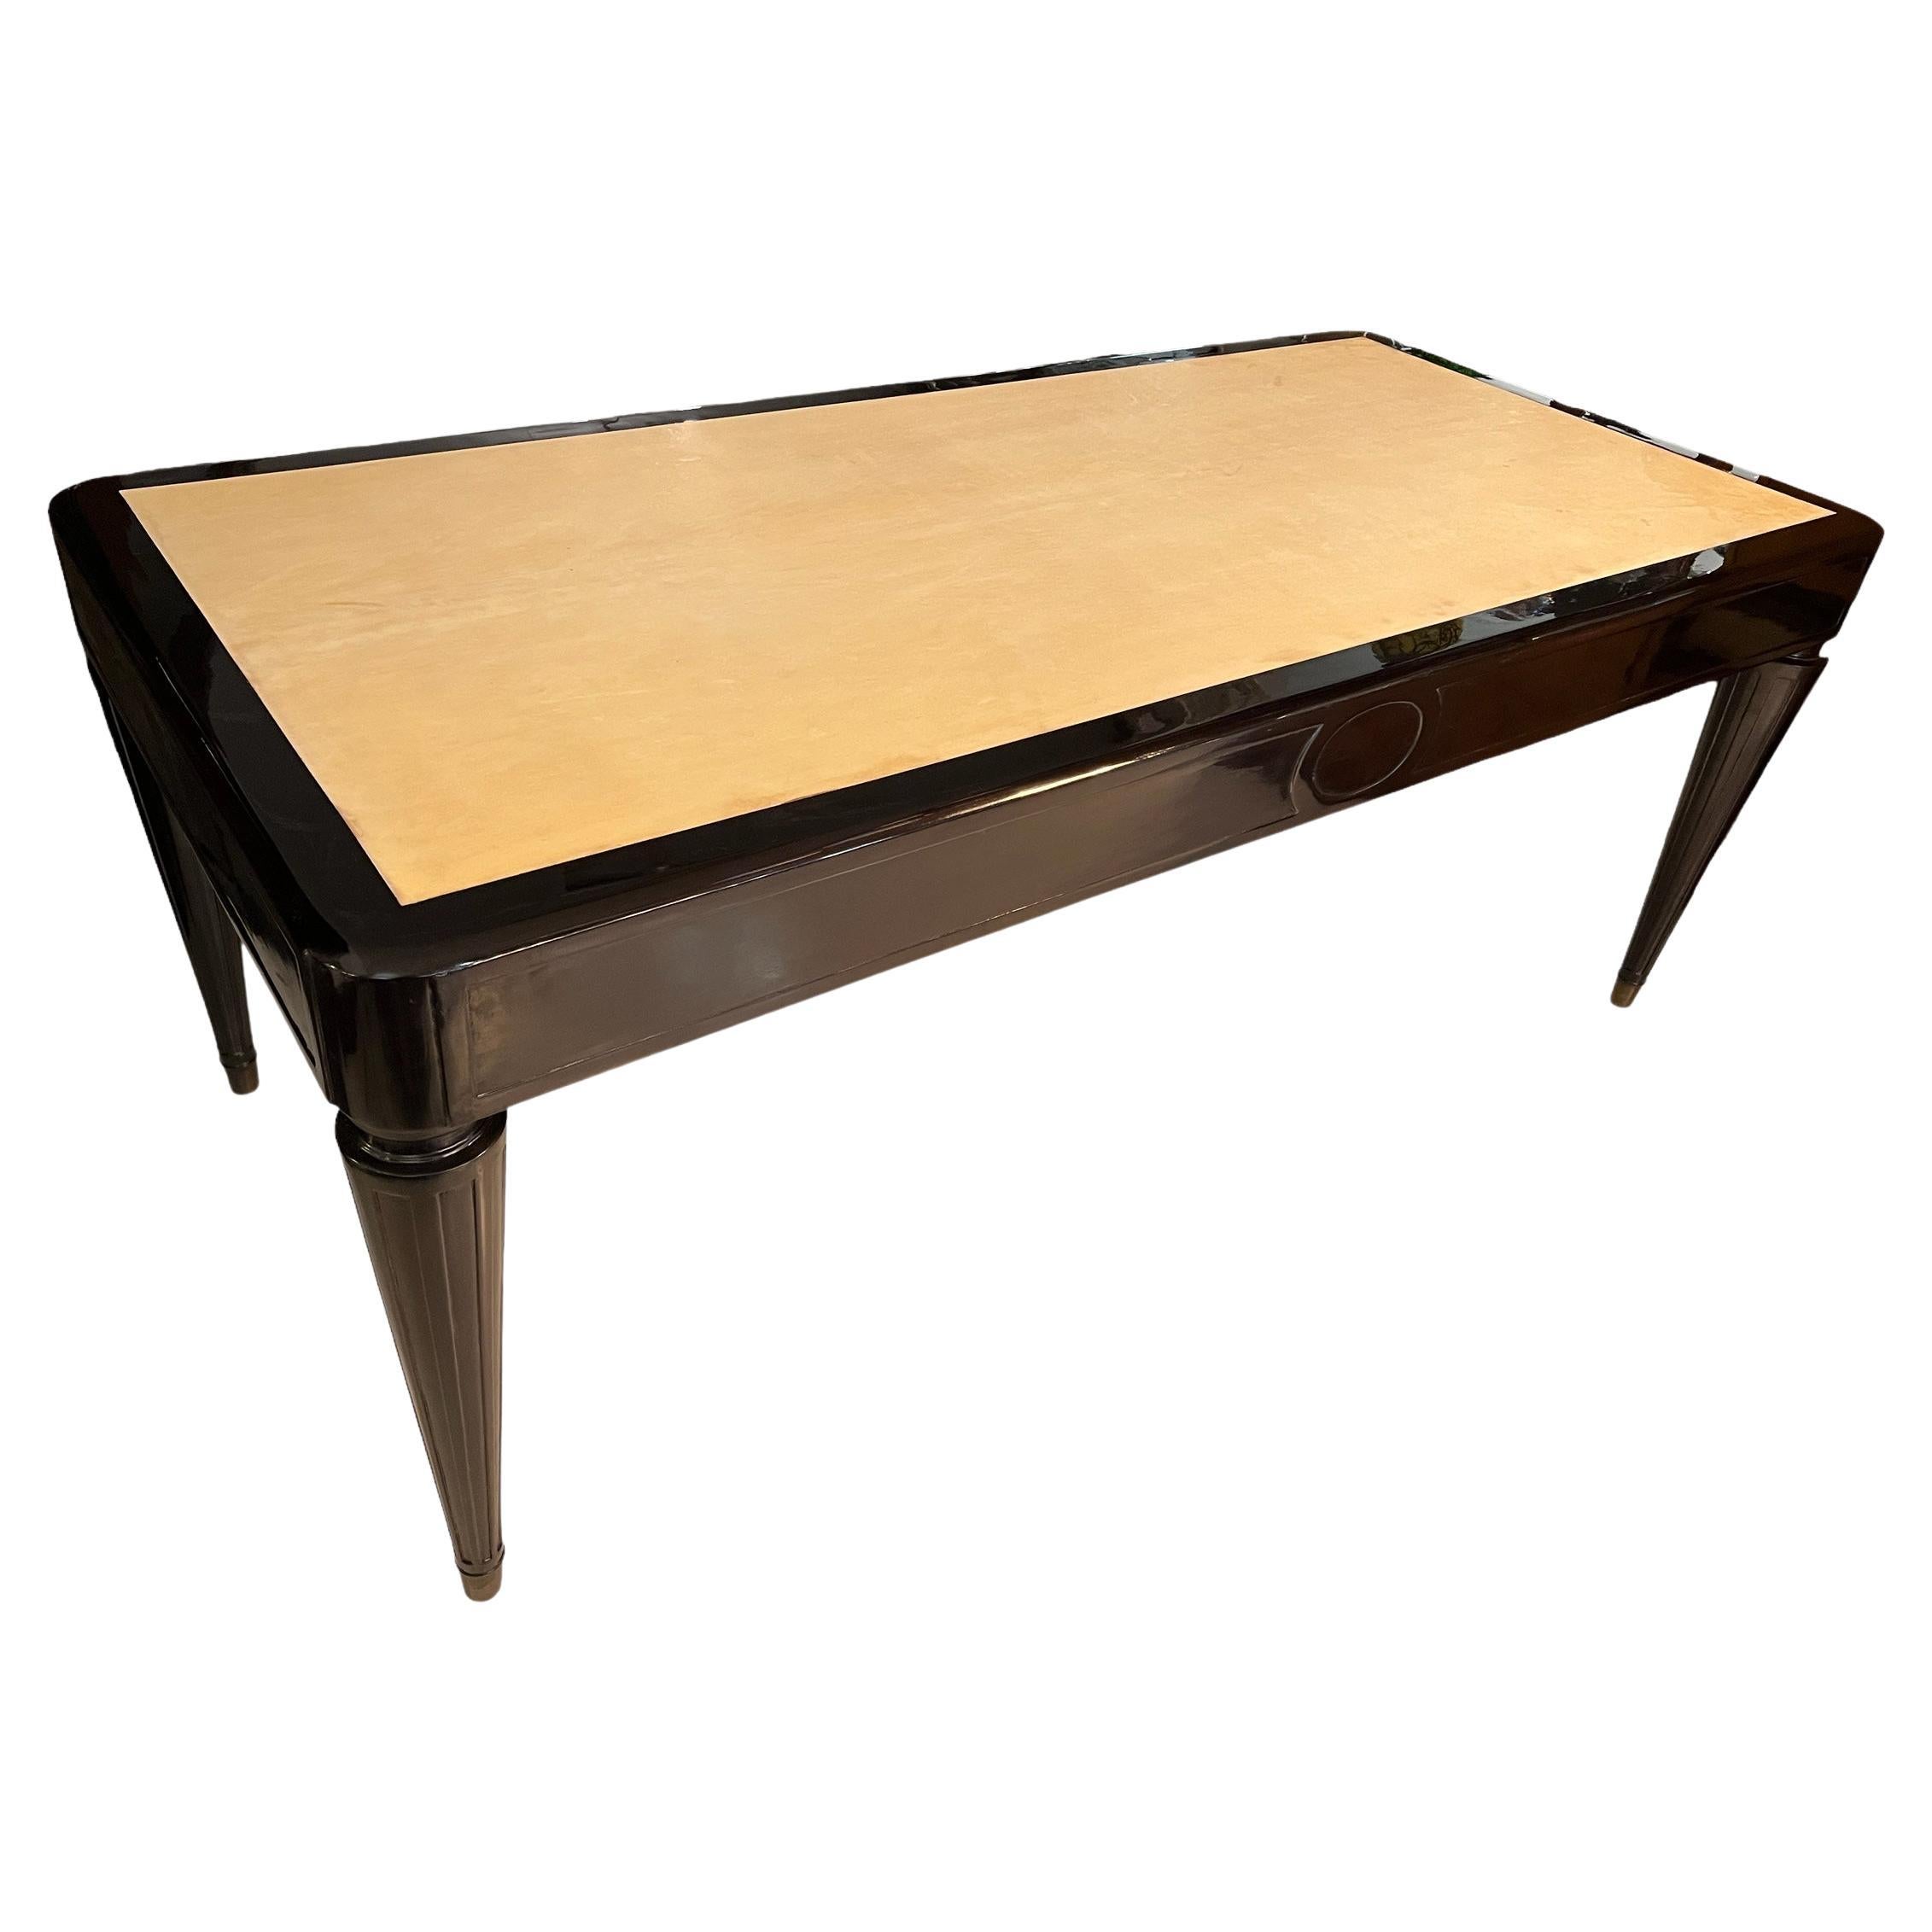 Big Desk Art Deco in Wood and Parchment, with 3 Drawers, 1930, Made in France For Sale